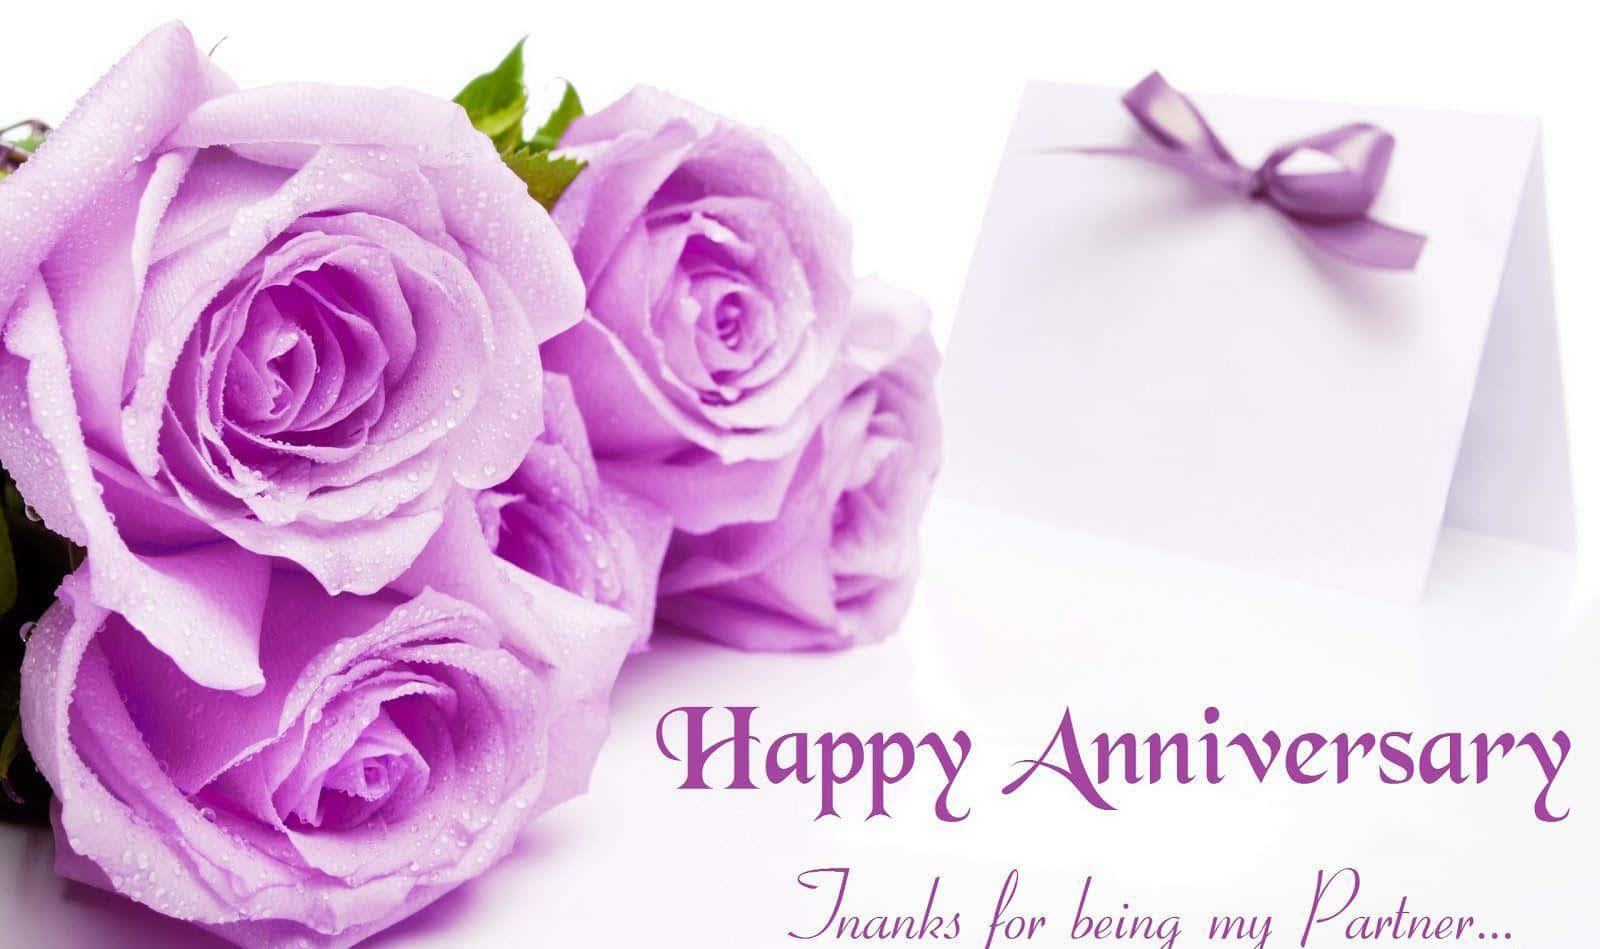 Happy Anniversary Wishes For Wife